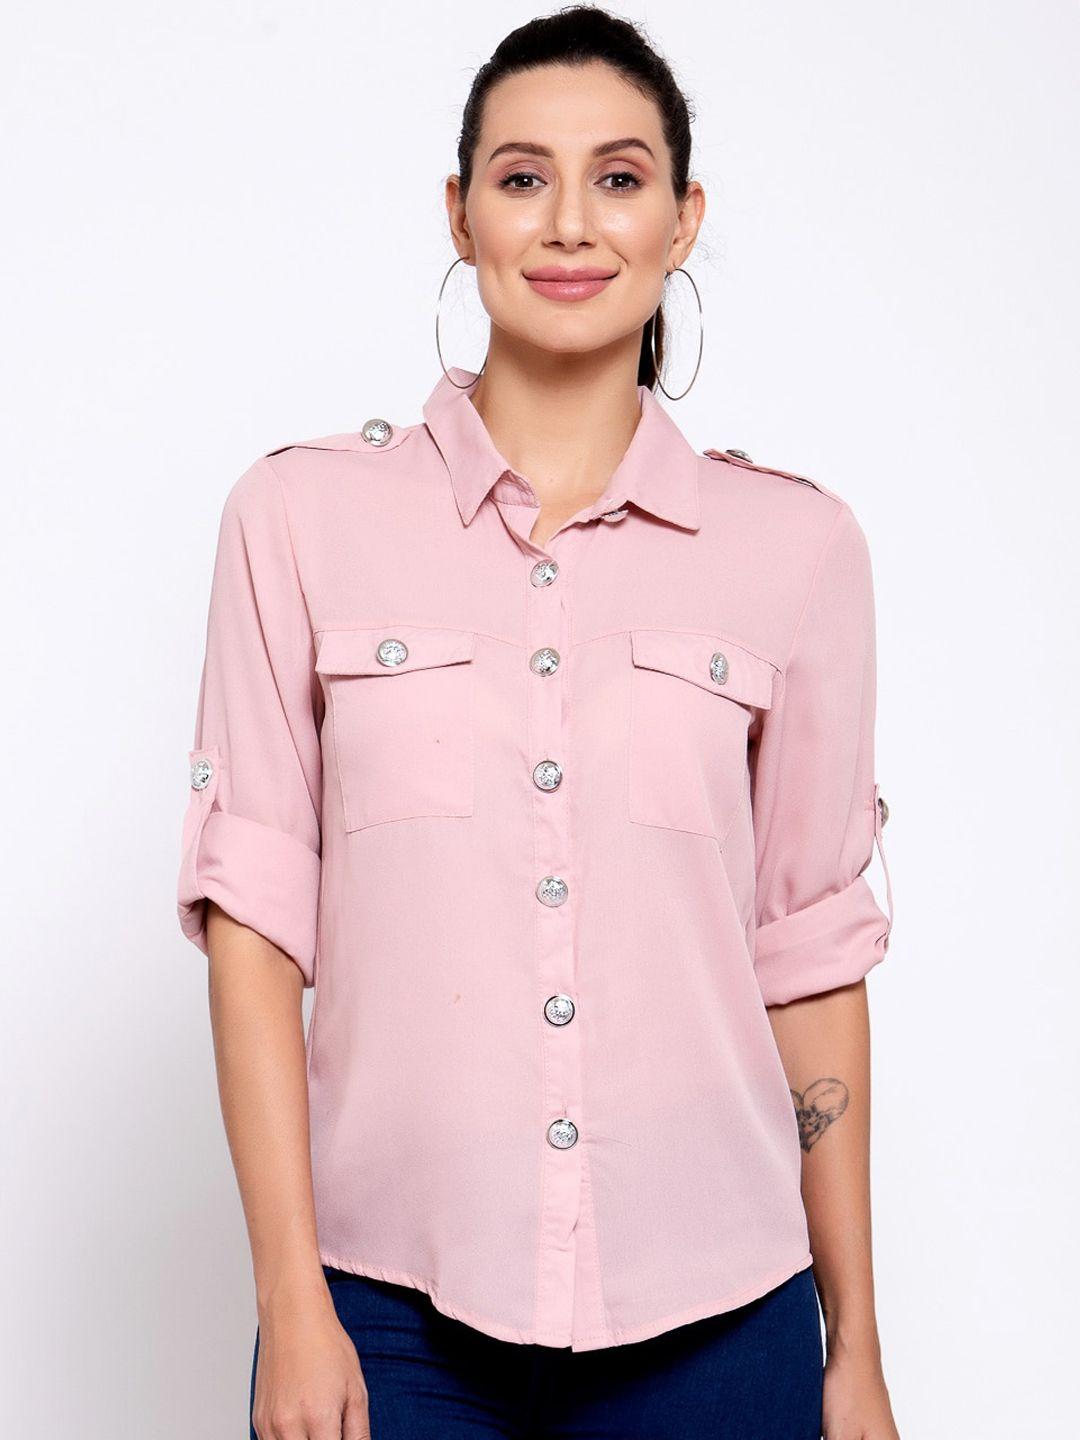 iki chic pink roll-up sleeves georgette shirt style top